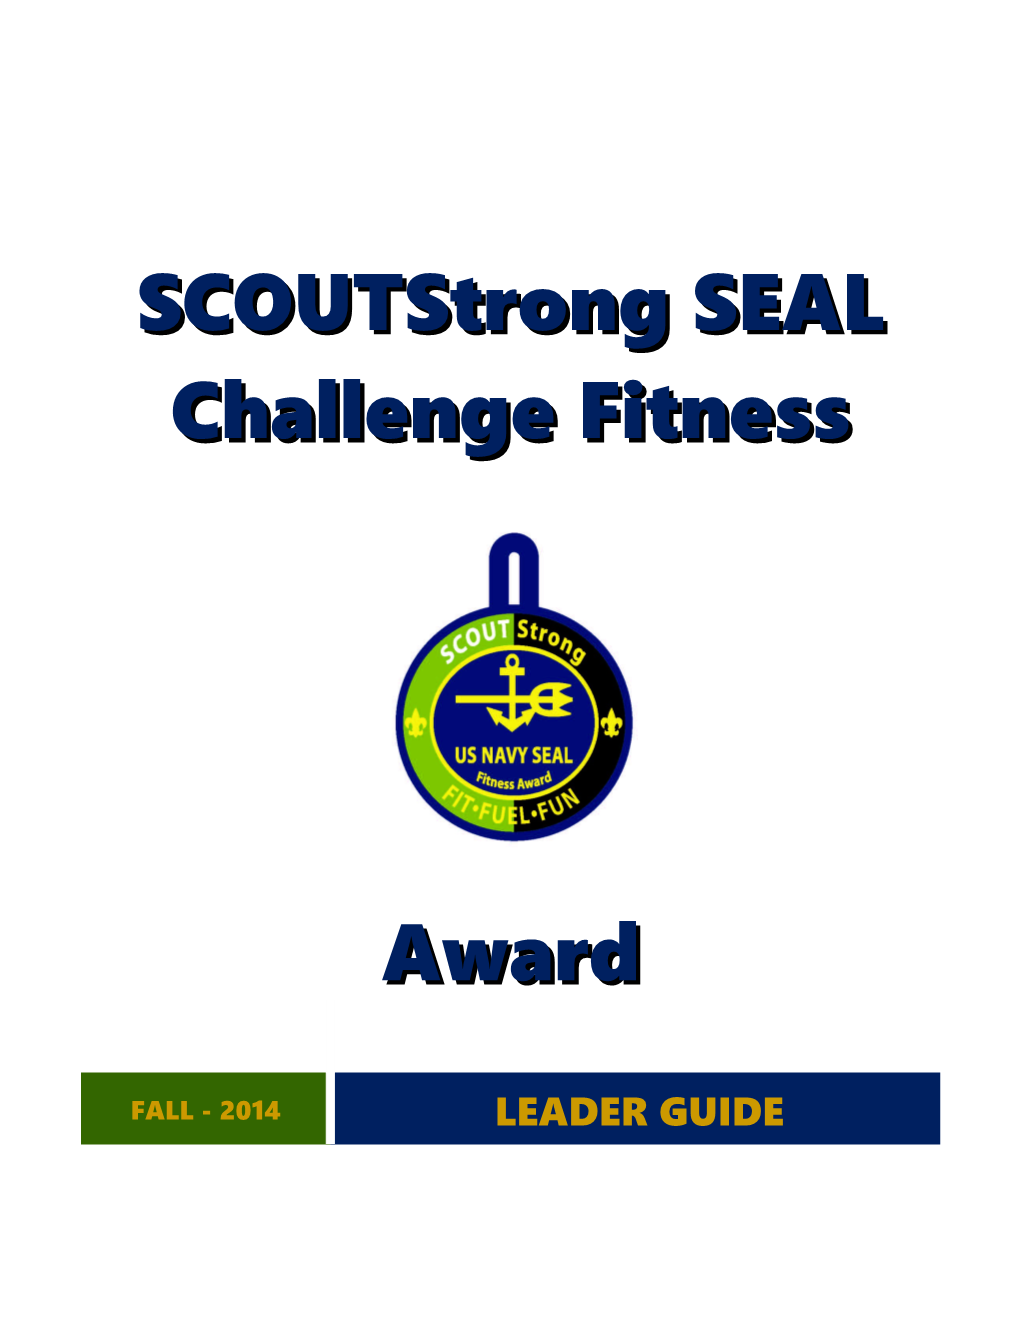 Scoutstrong SEAL Challenge Fitness Award